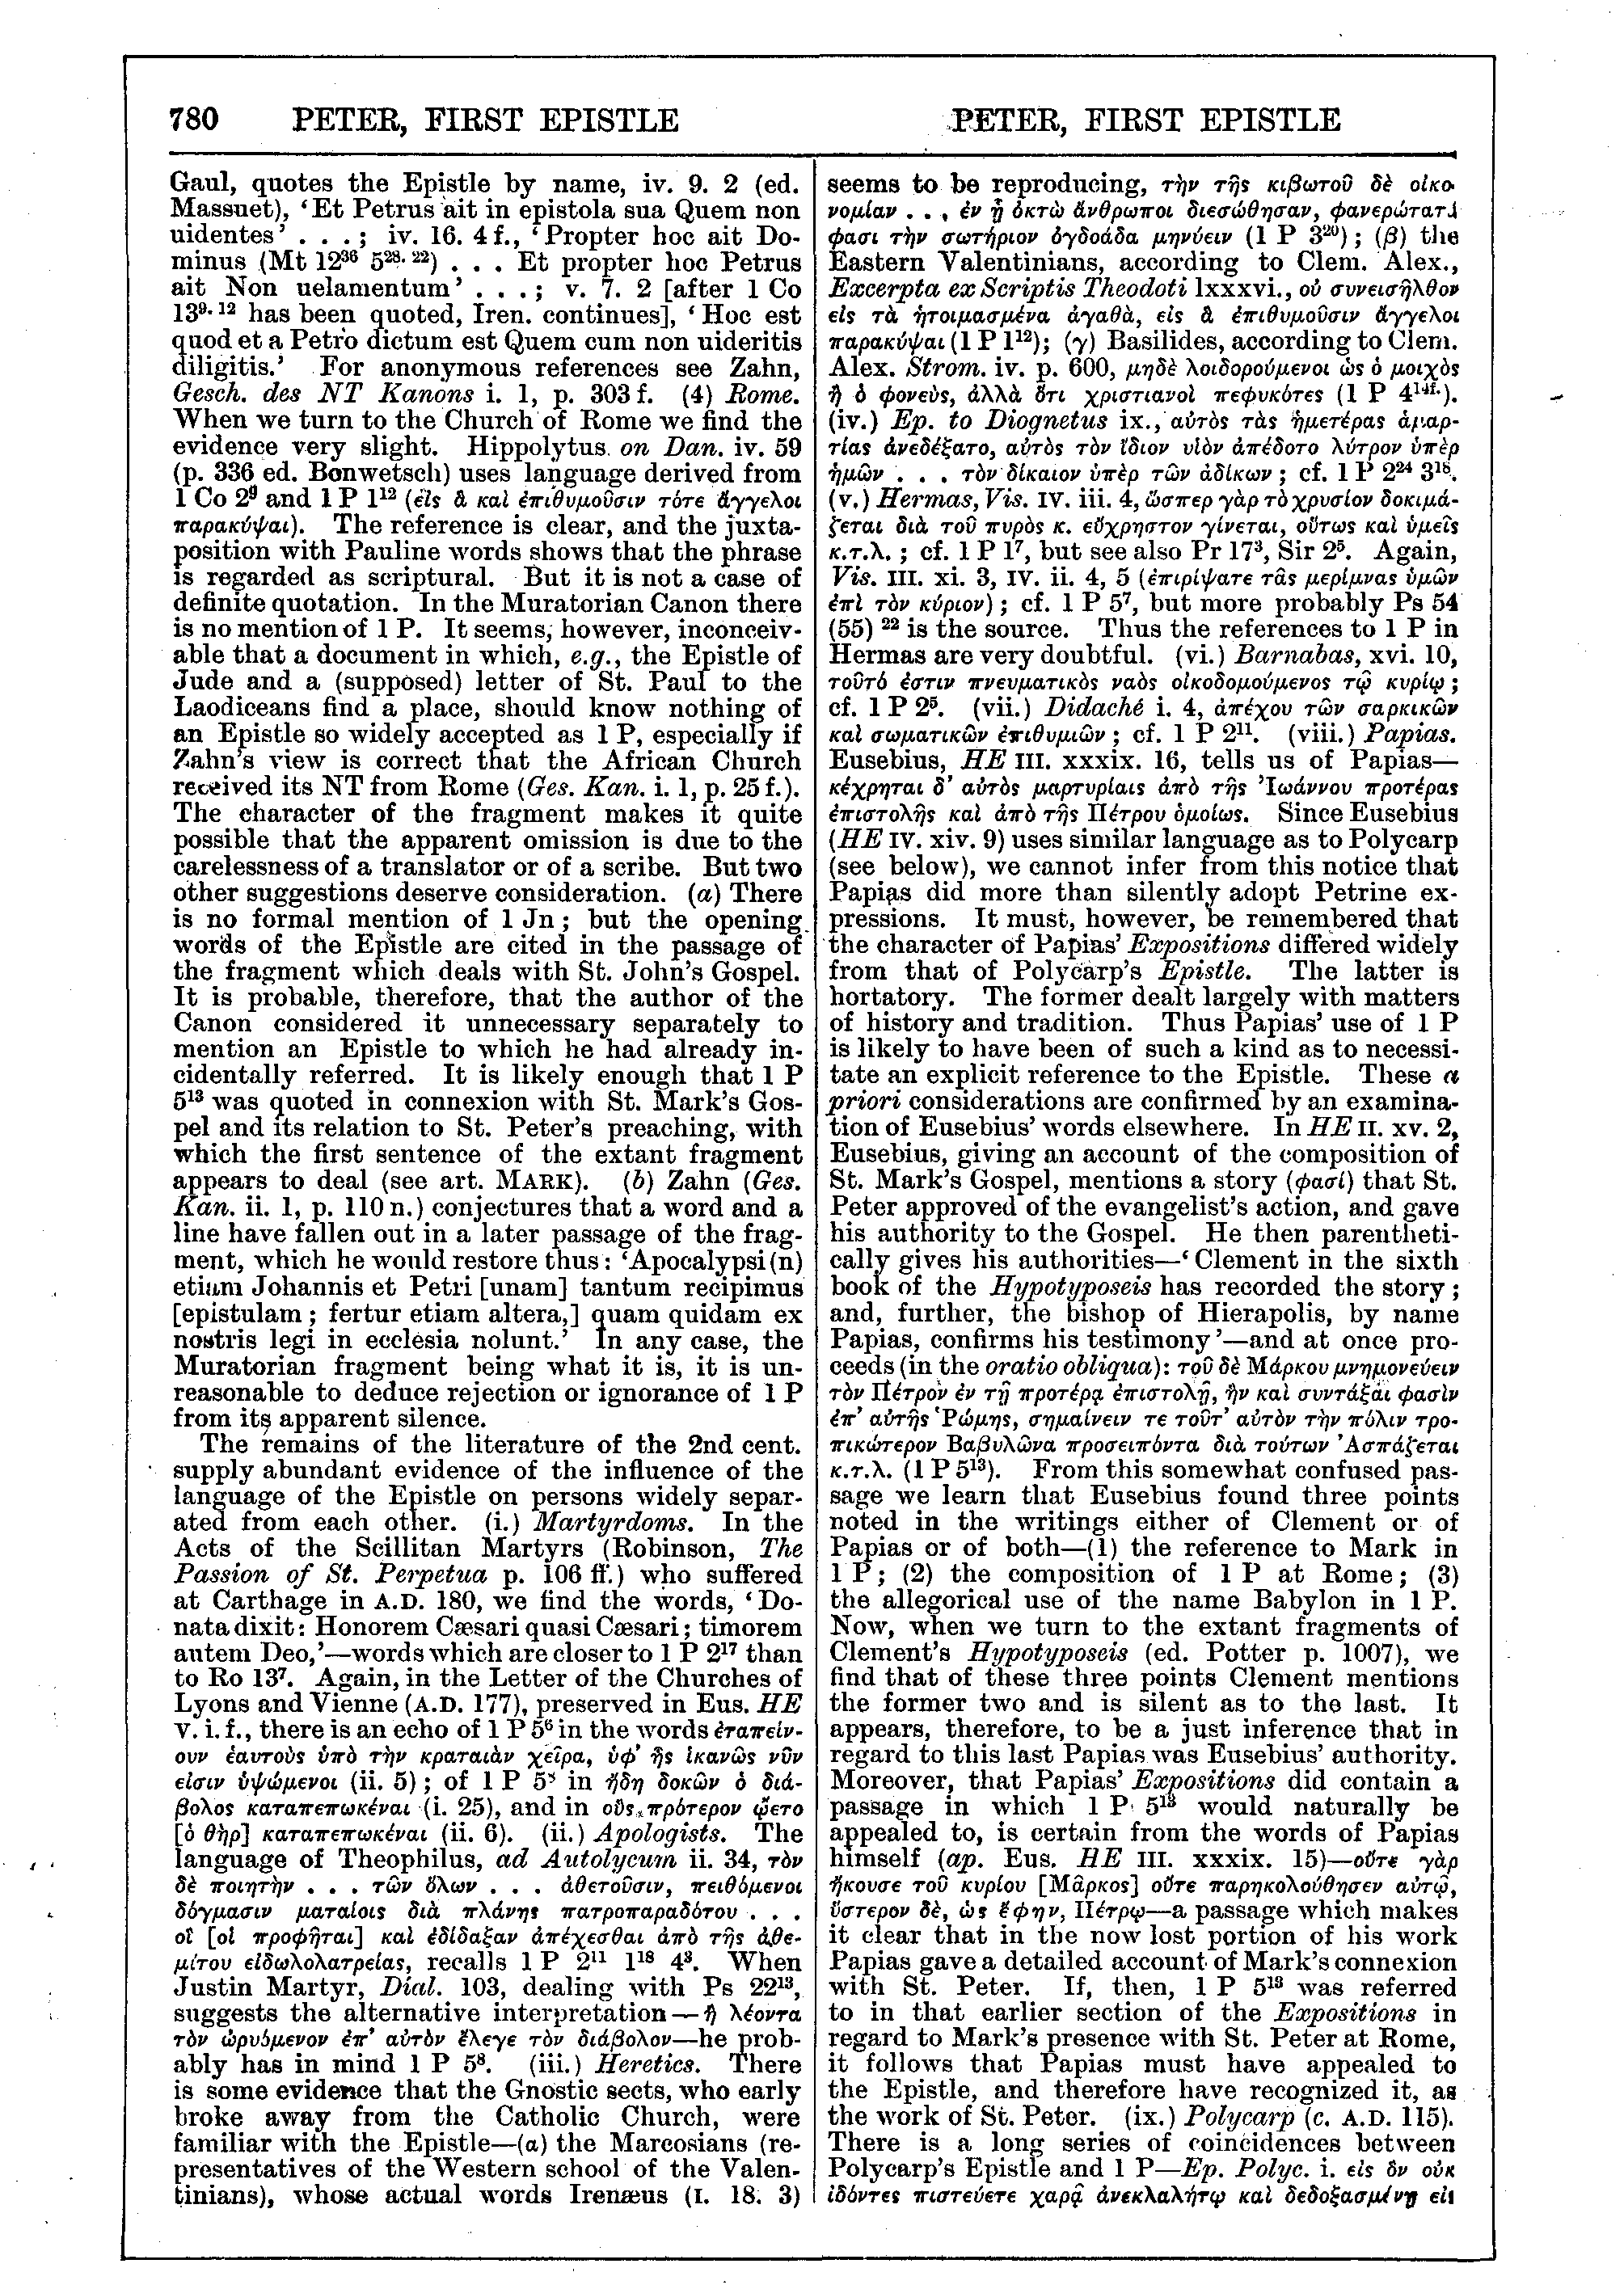 Image of page 780